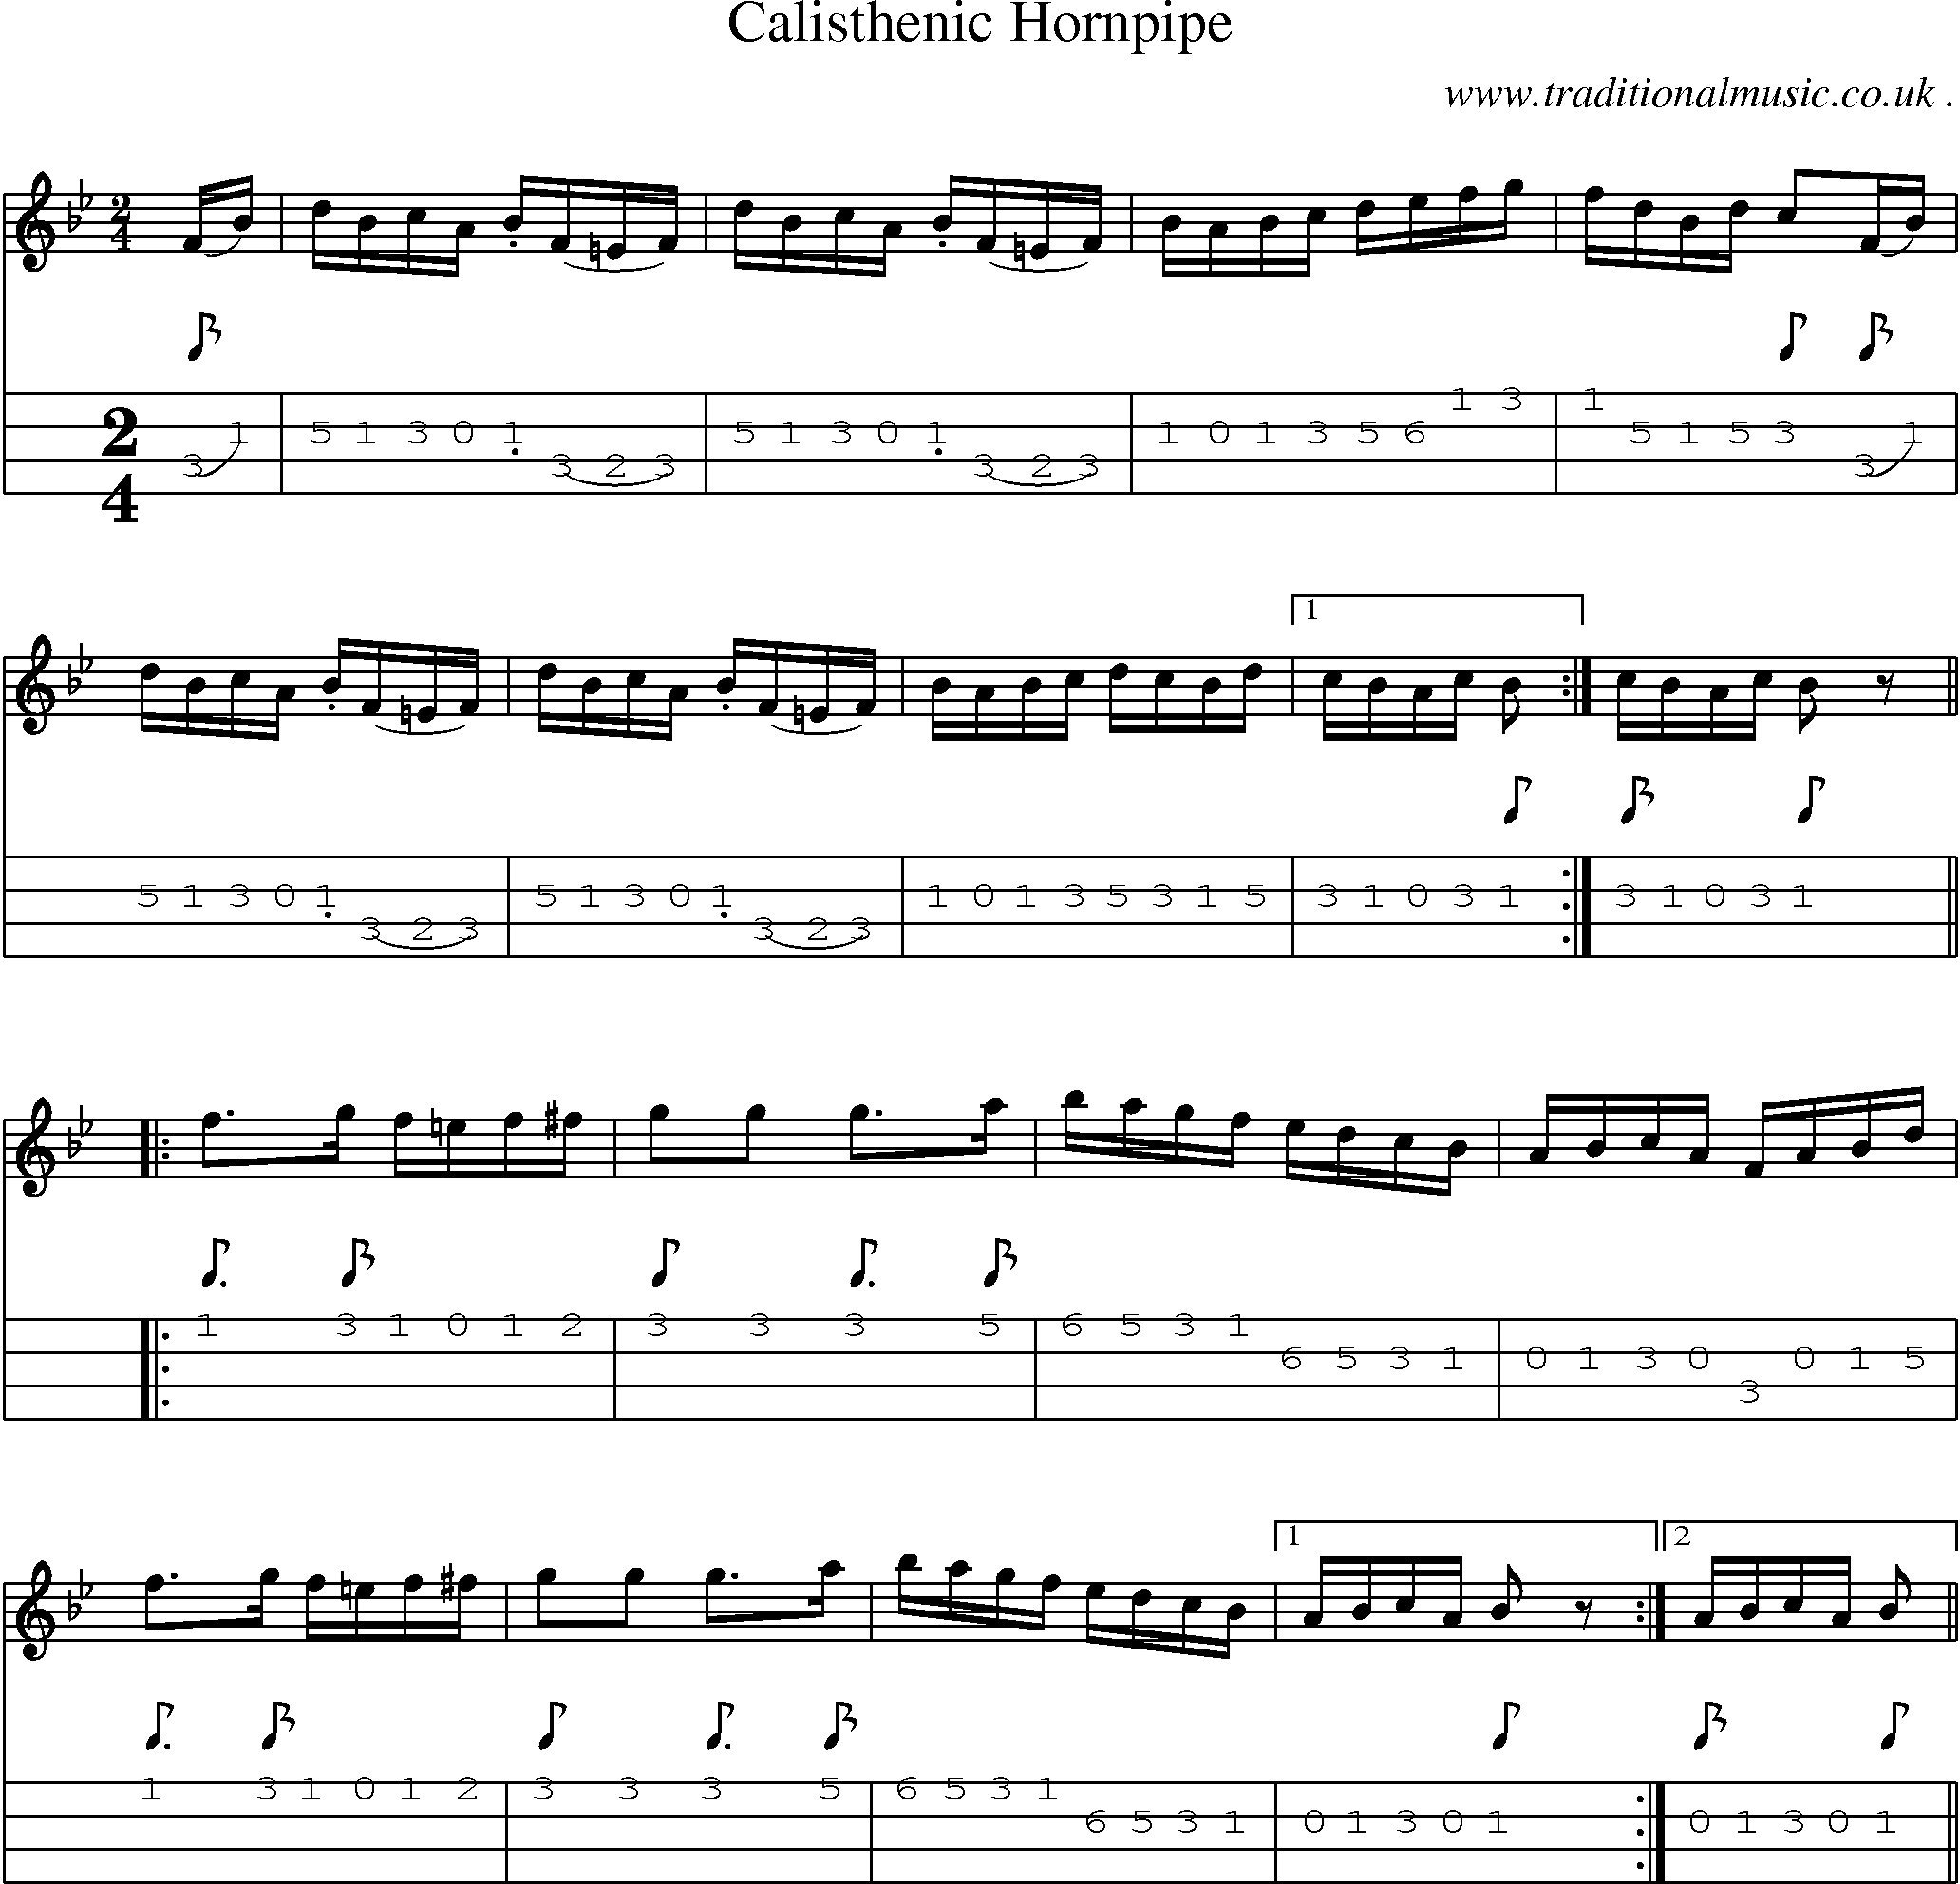 Sheet-Music and Mandolin Tabs for Calisthenic Hornpipe